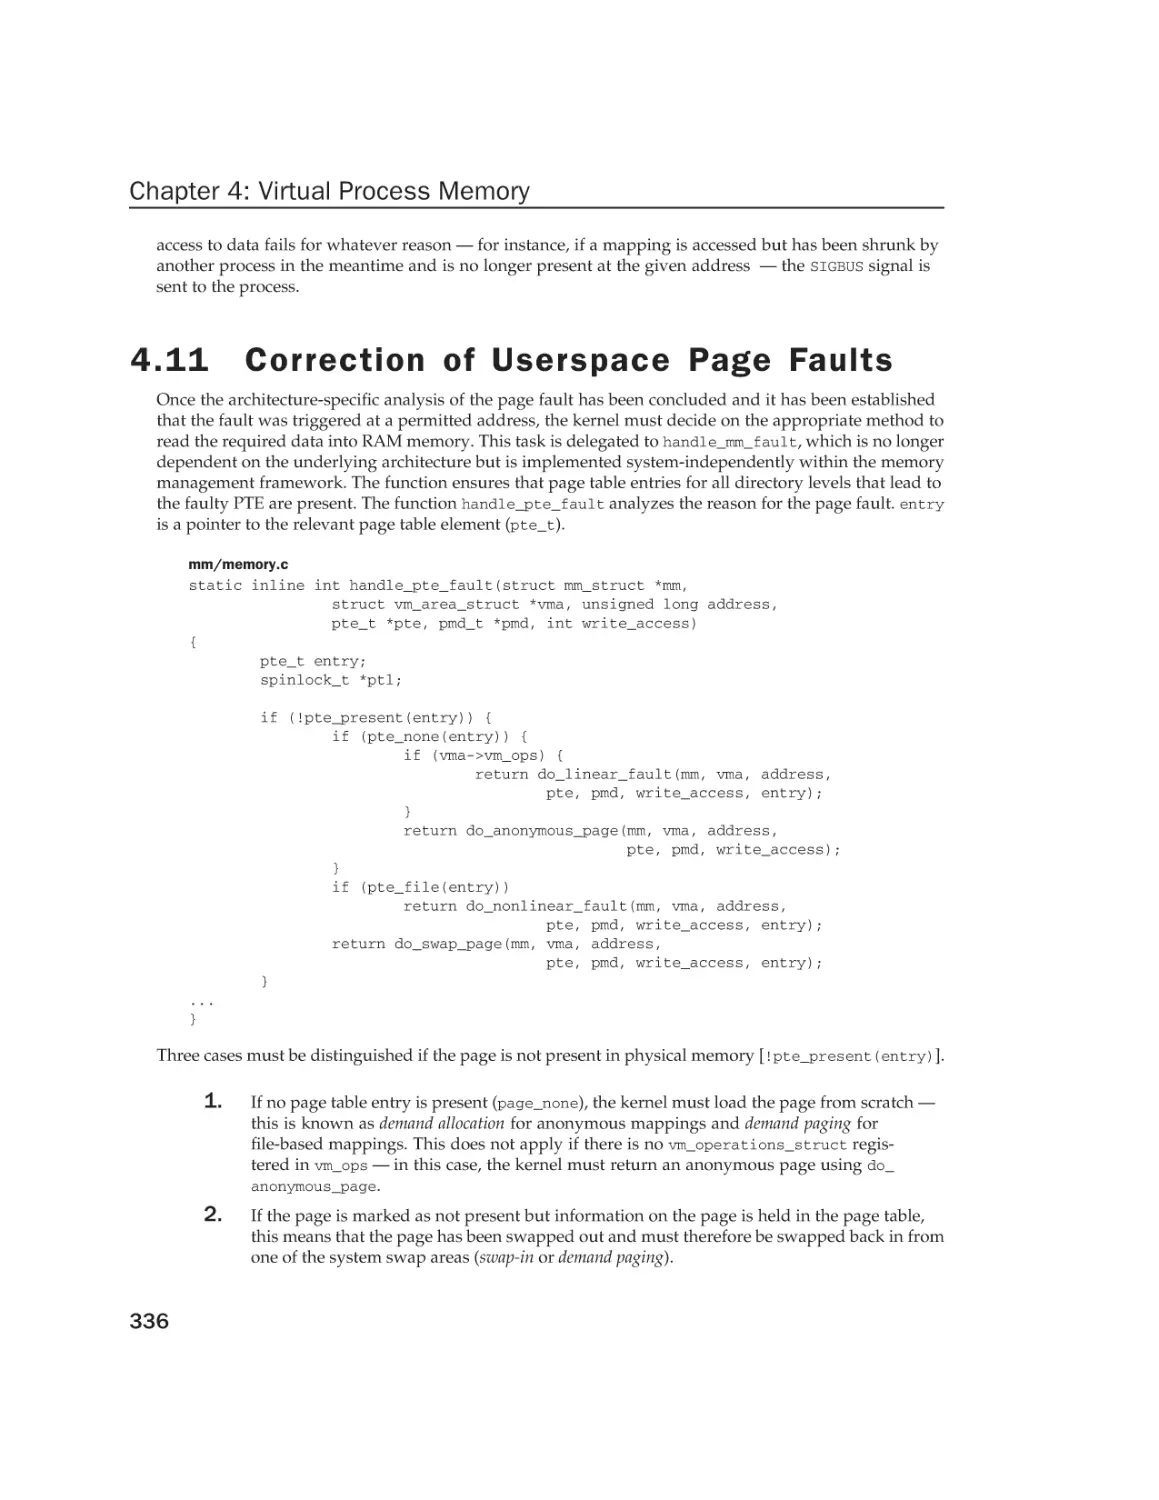 4.11 Correction of Userspace Page Faults